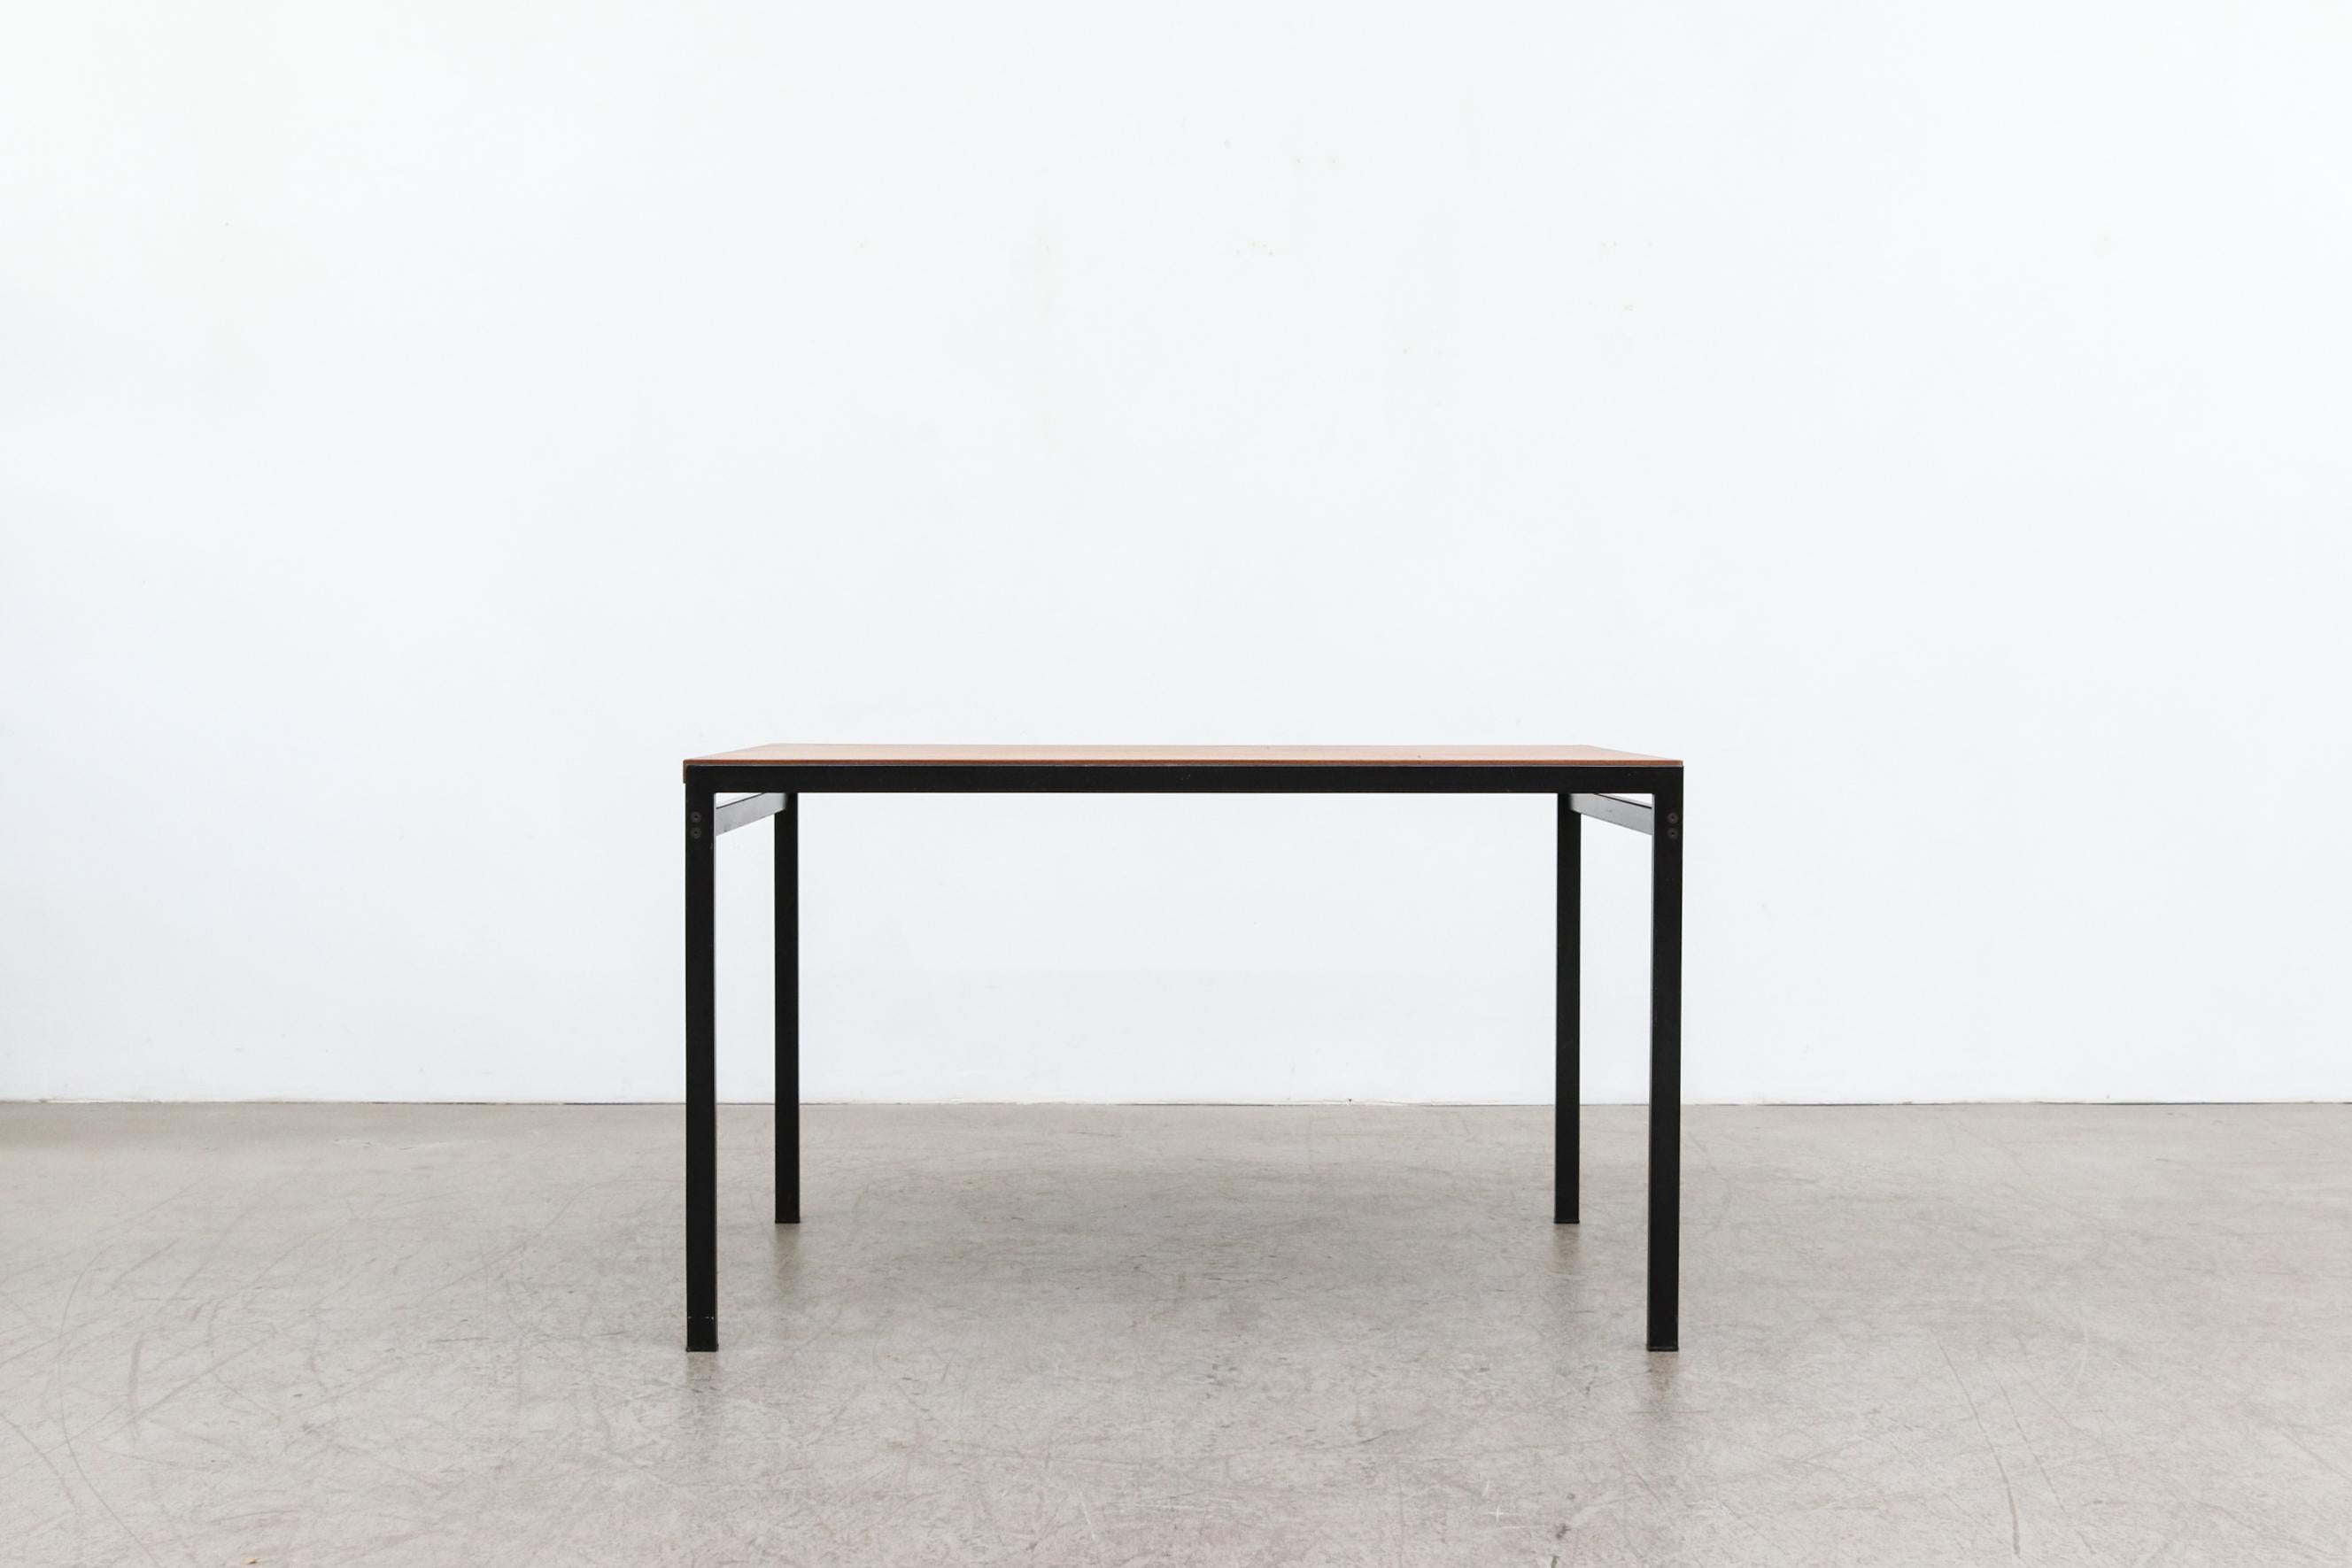 1960's Cees Braakman Japanese Series Dining Table for Pastoe. Lightly refinished teak top with black enameled metal legs. In original condition with visible wear. This version does not have a leaf. Wear is consistent with it's age and use.